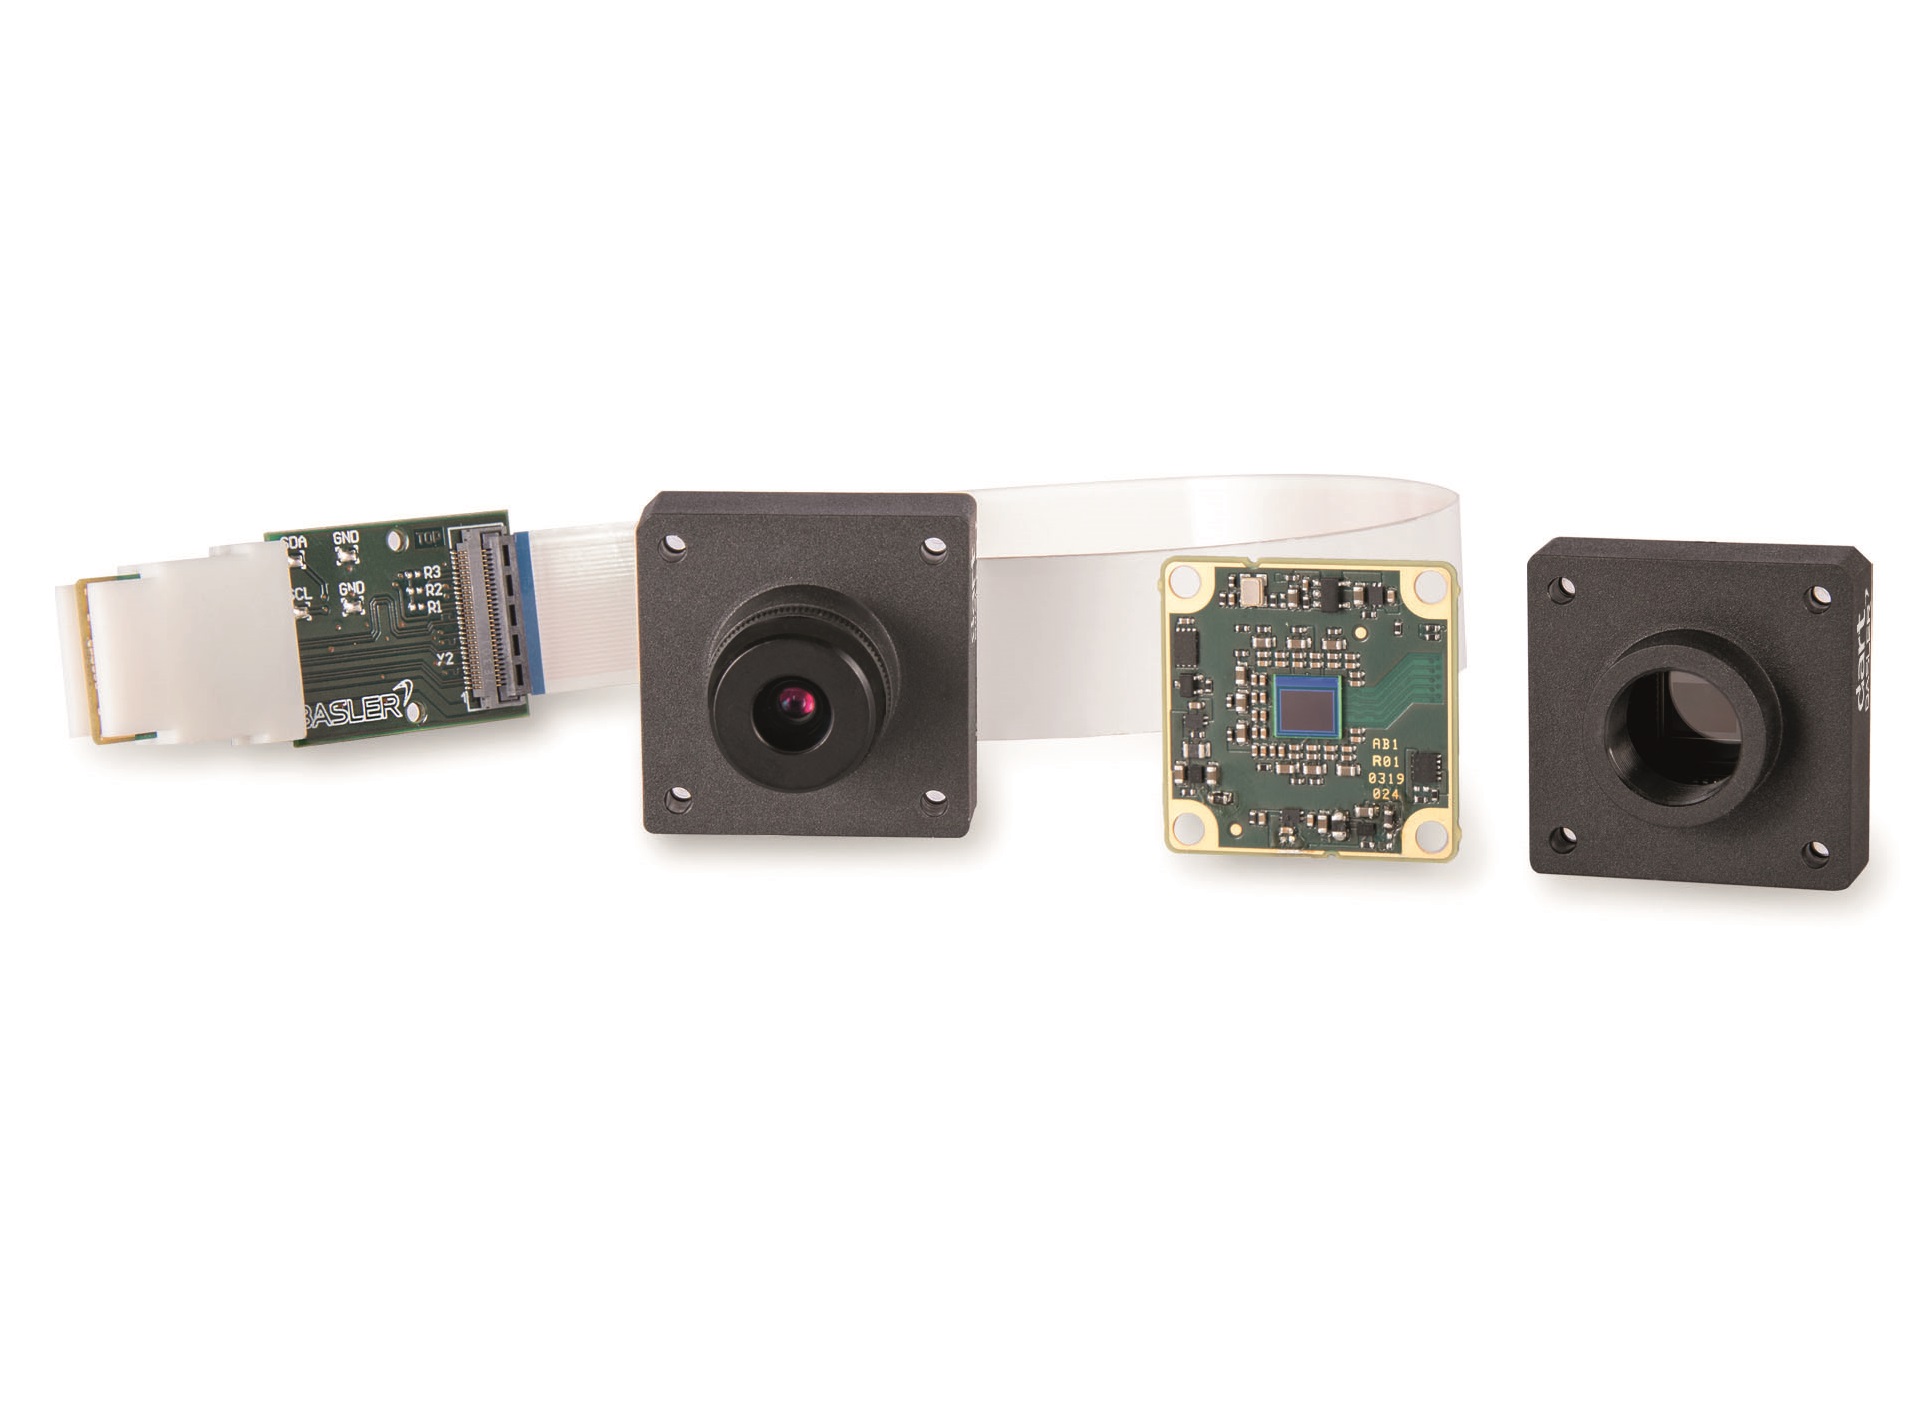 Basler's new dart MIPI camera modules and Add-on Camera Kits are optimized for NXPs i.MX 8 processor series.